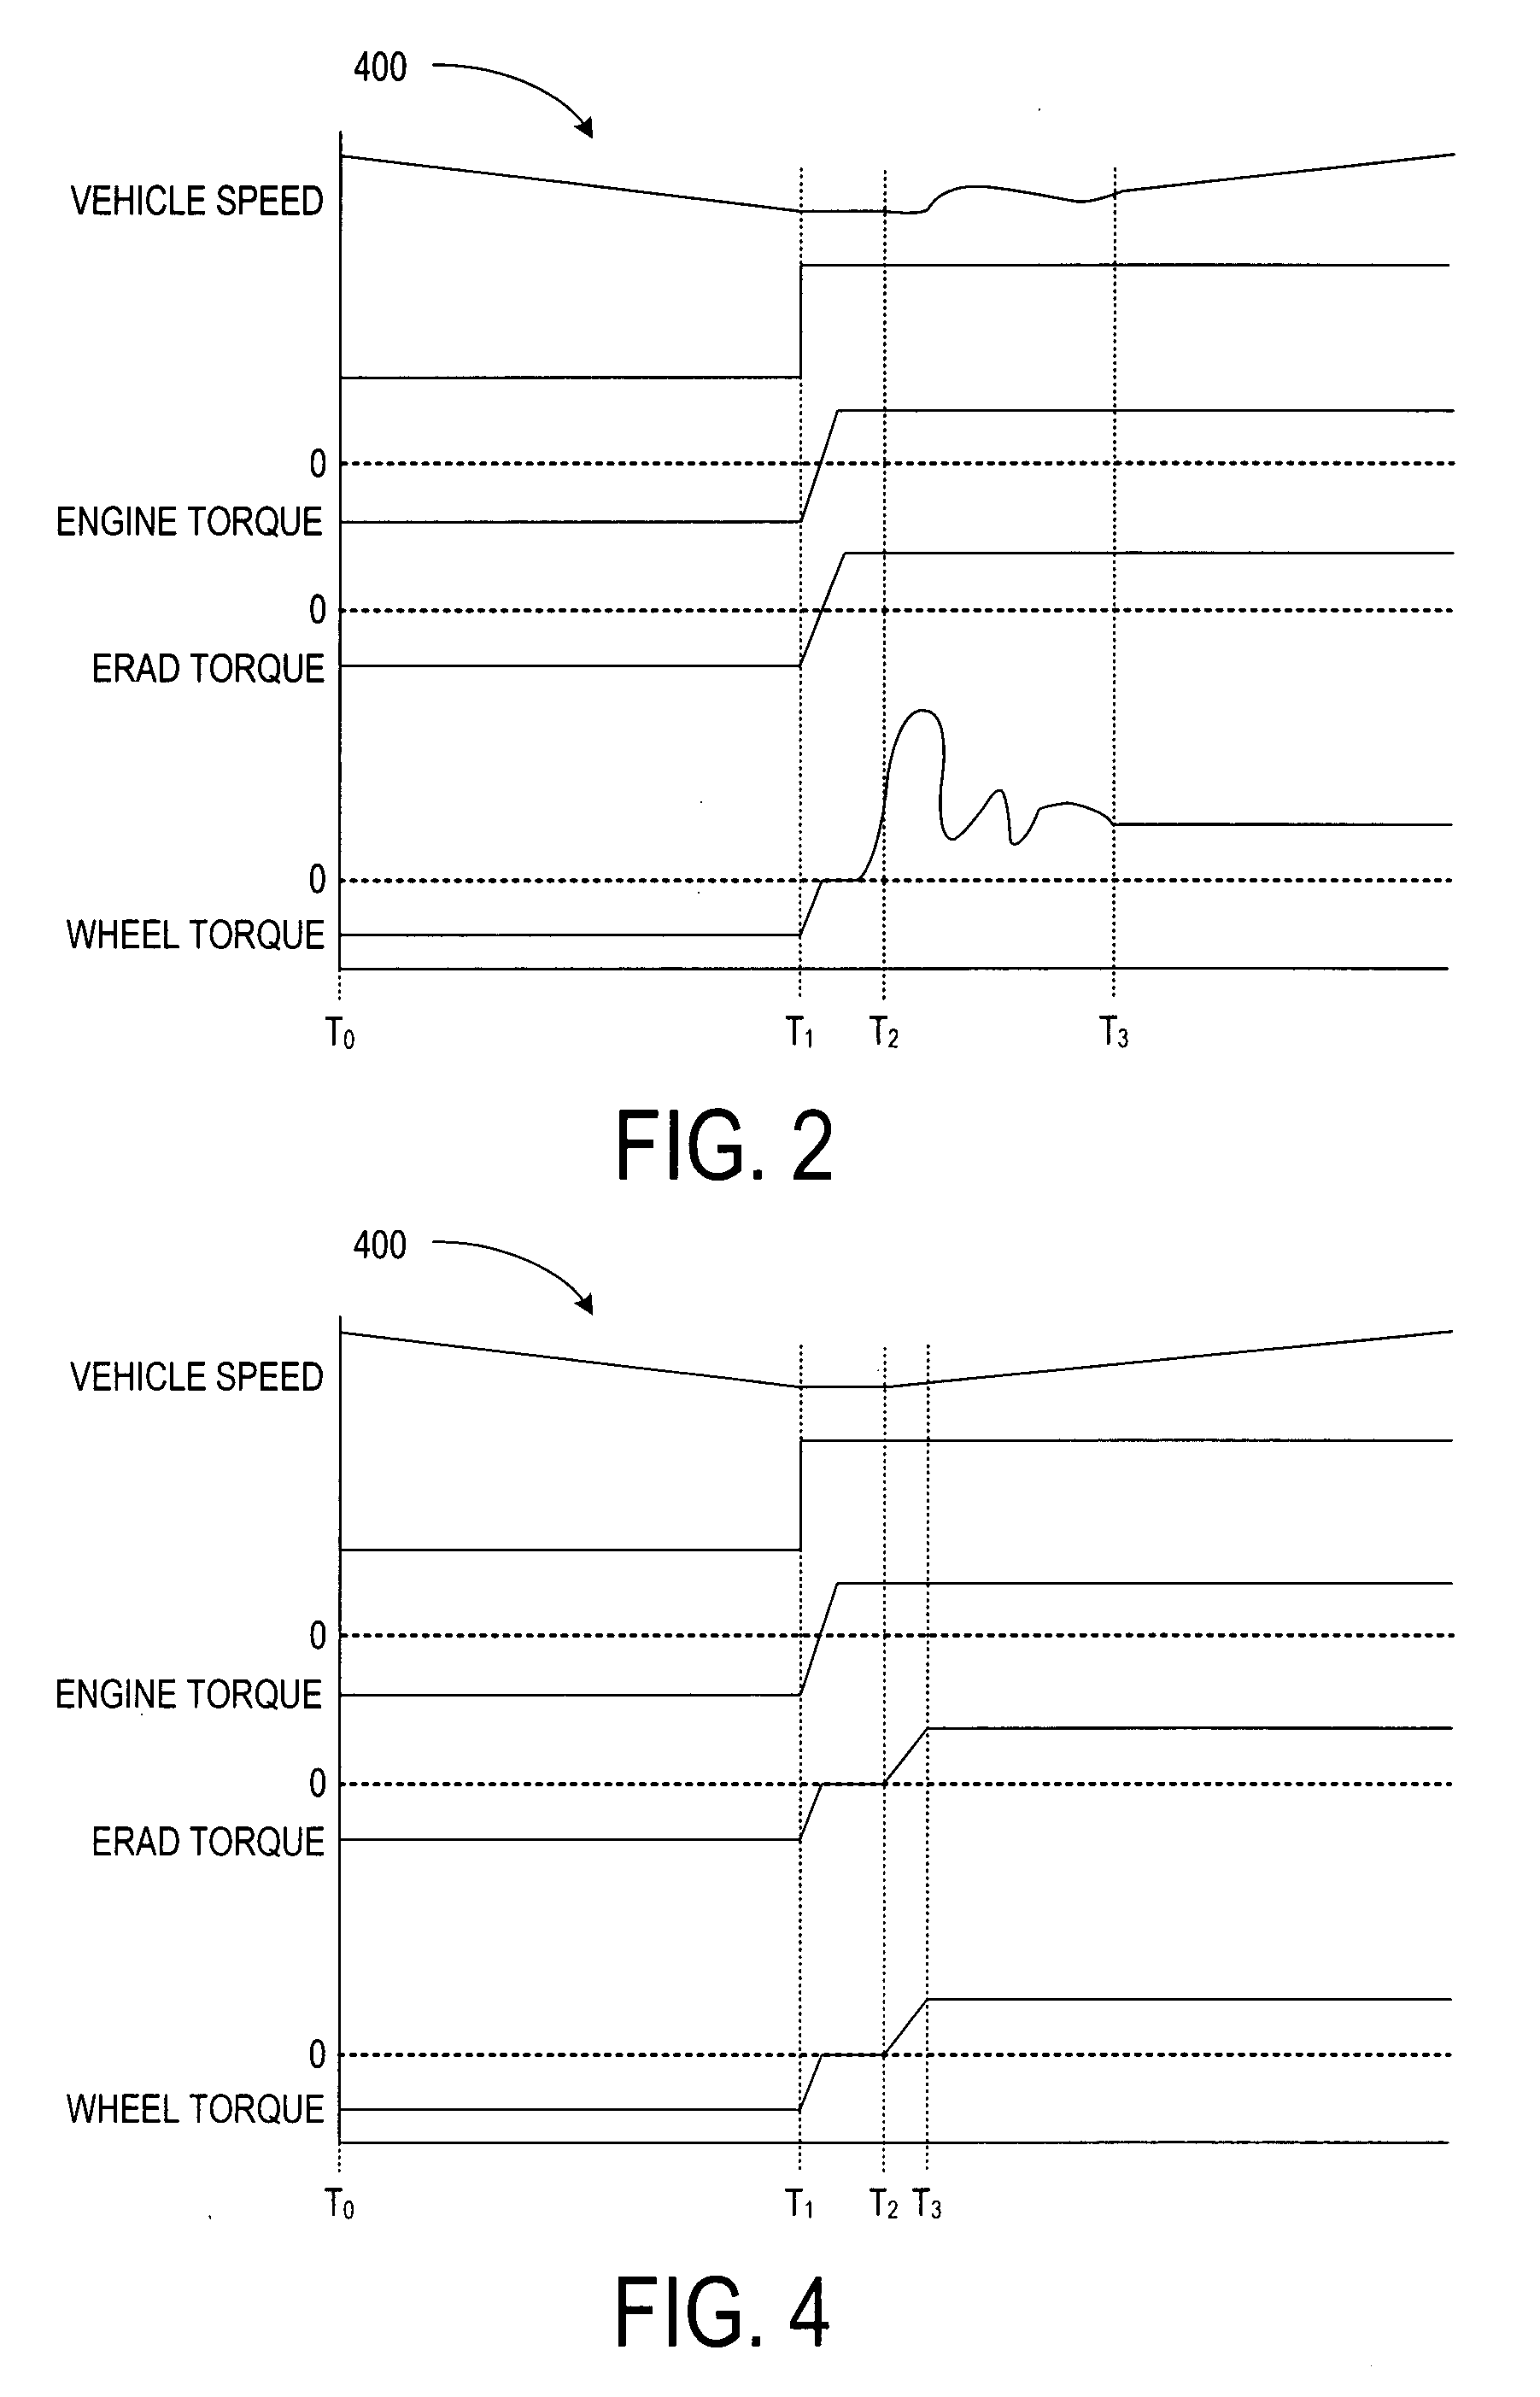 System and method of inhibiting the affects of driveline backlash in a hybrid propulsion system